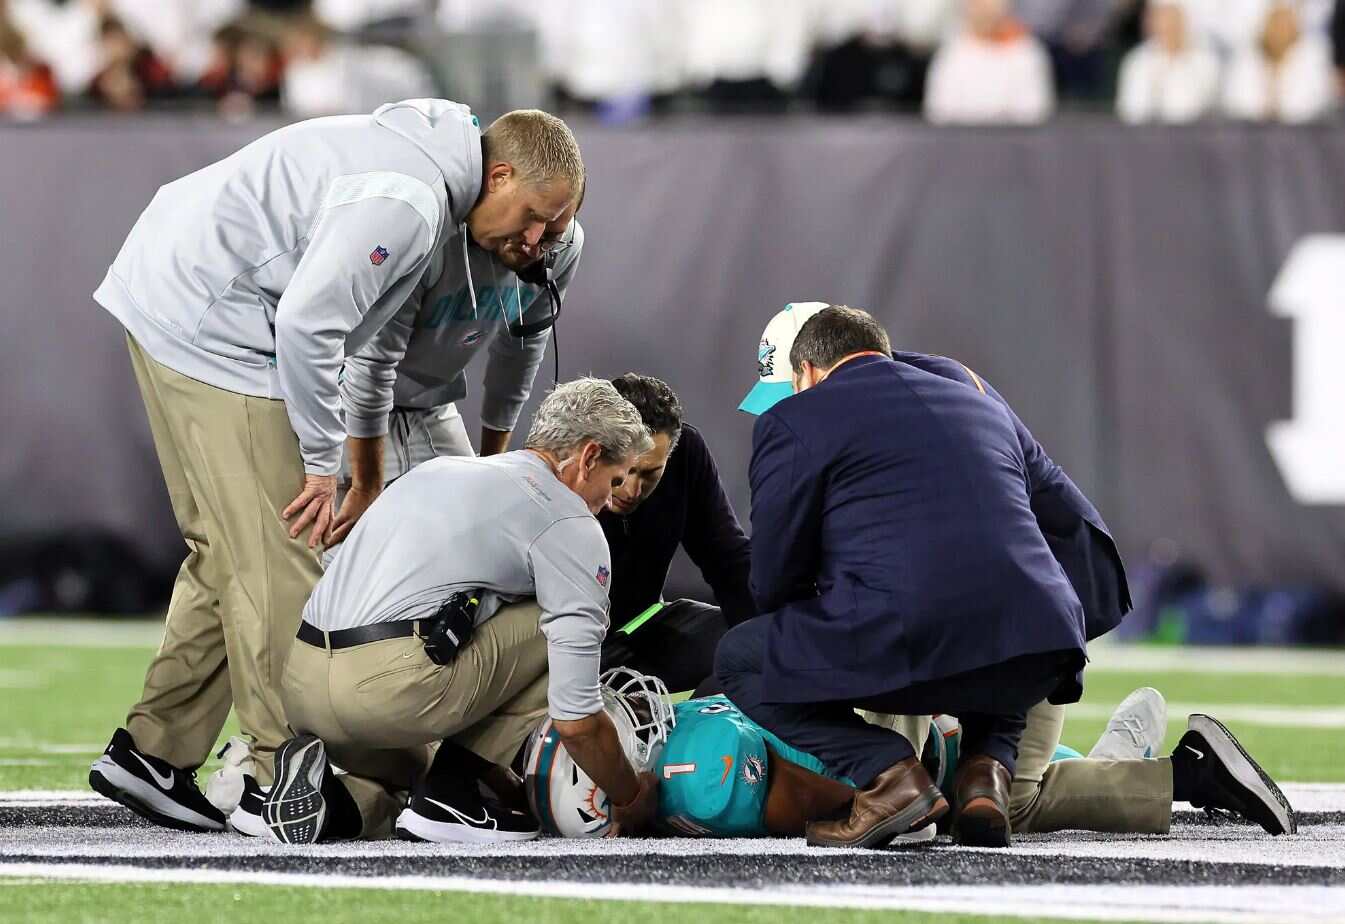 Tua Tagovailoa of the Dolphins was taken to the hospital after sustaining a head injury for the second time in as many games